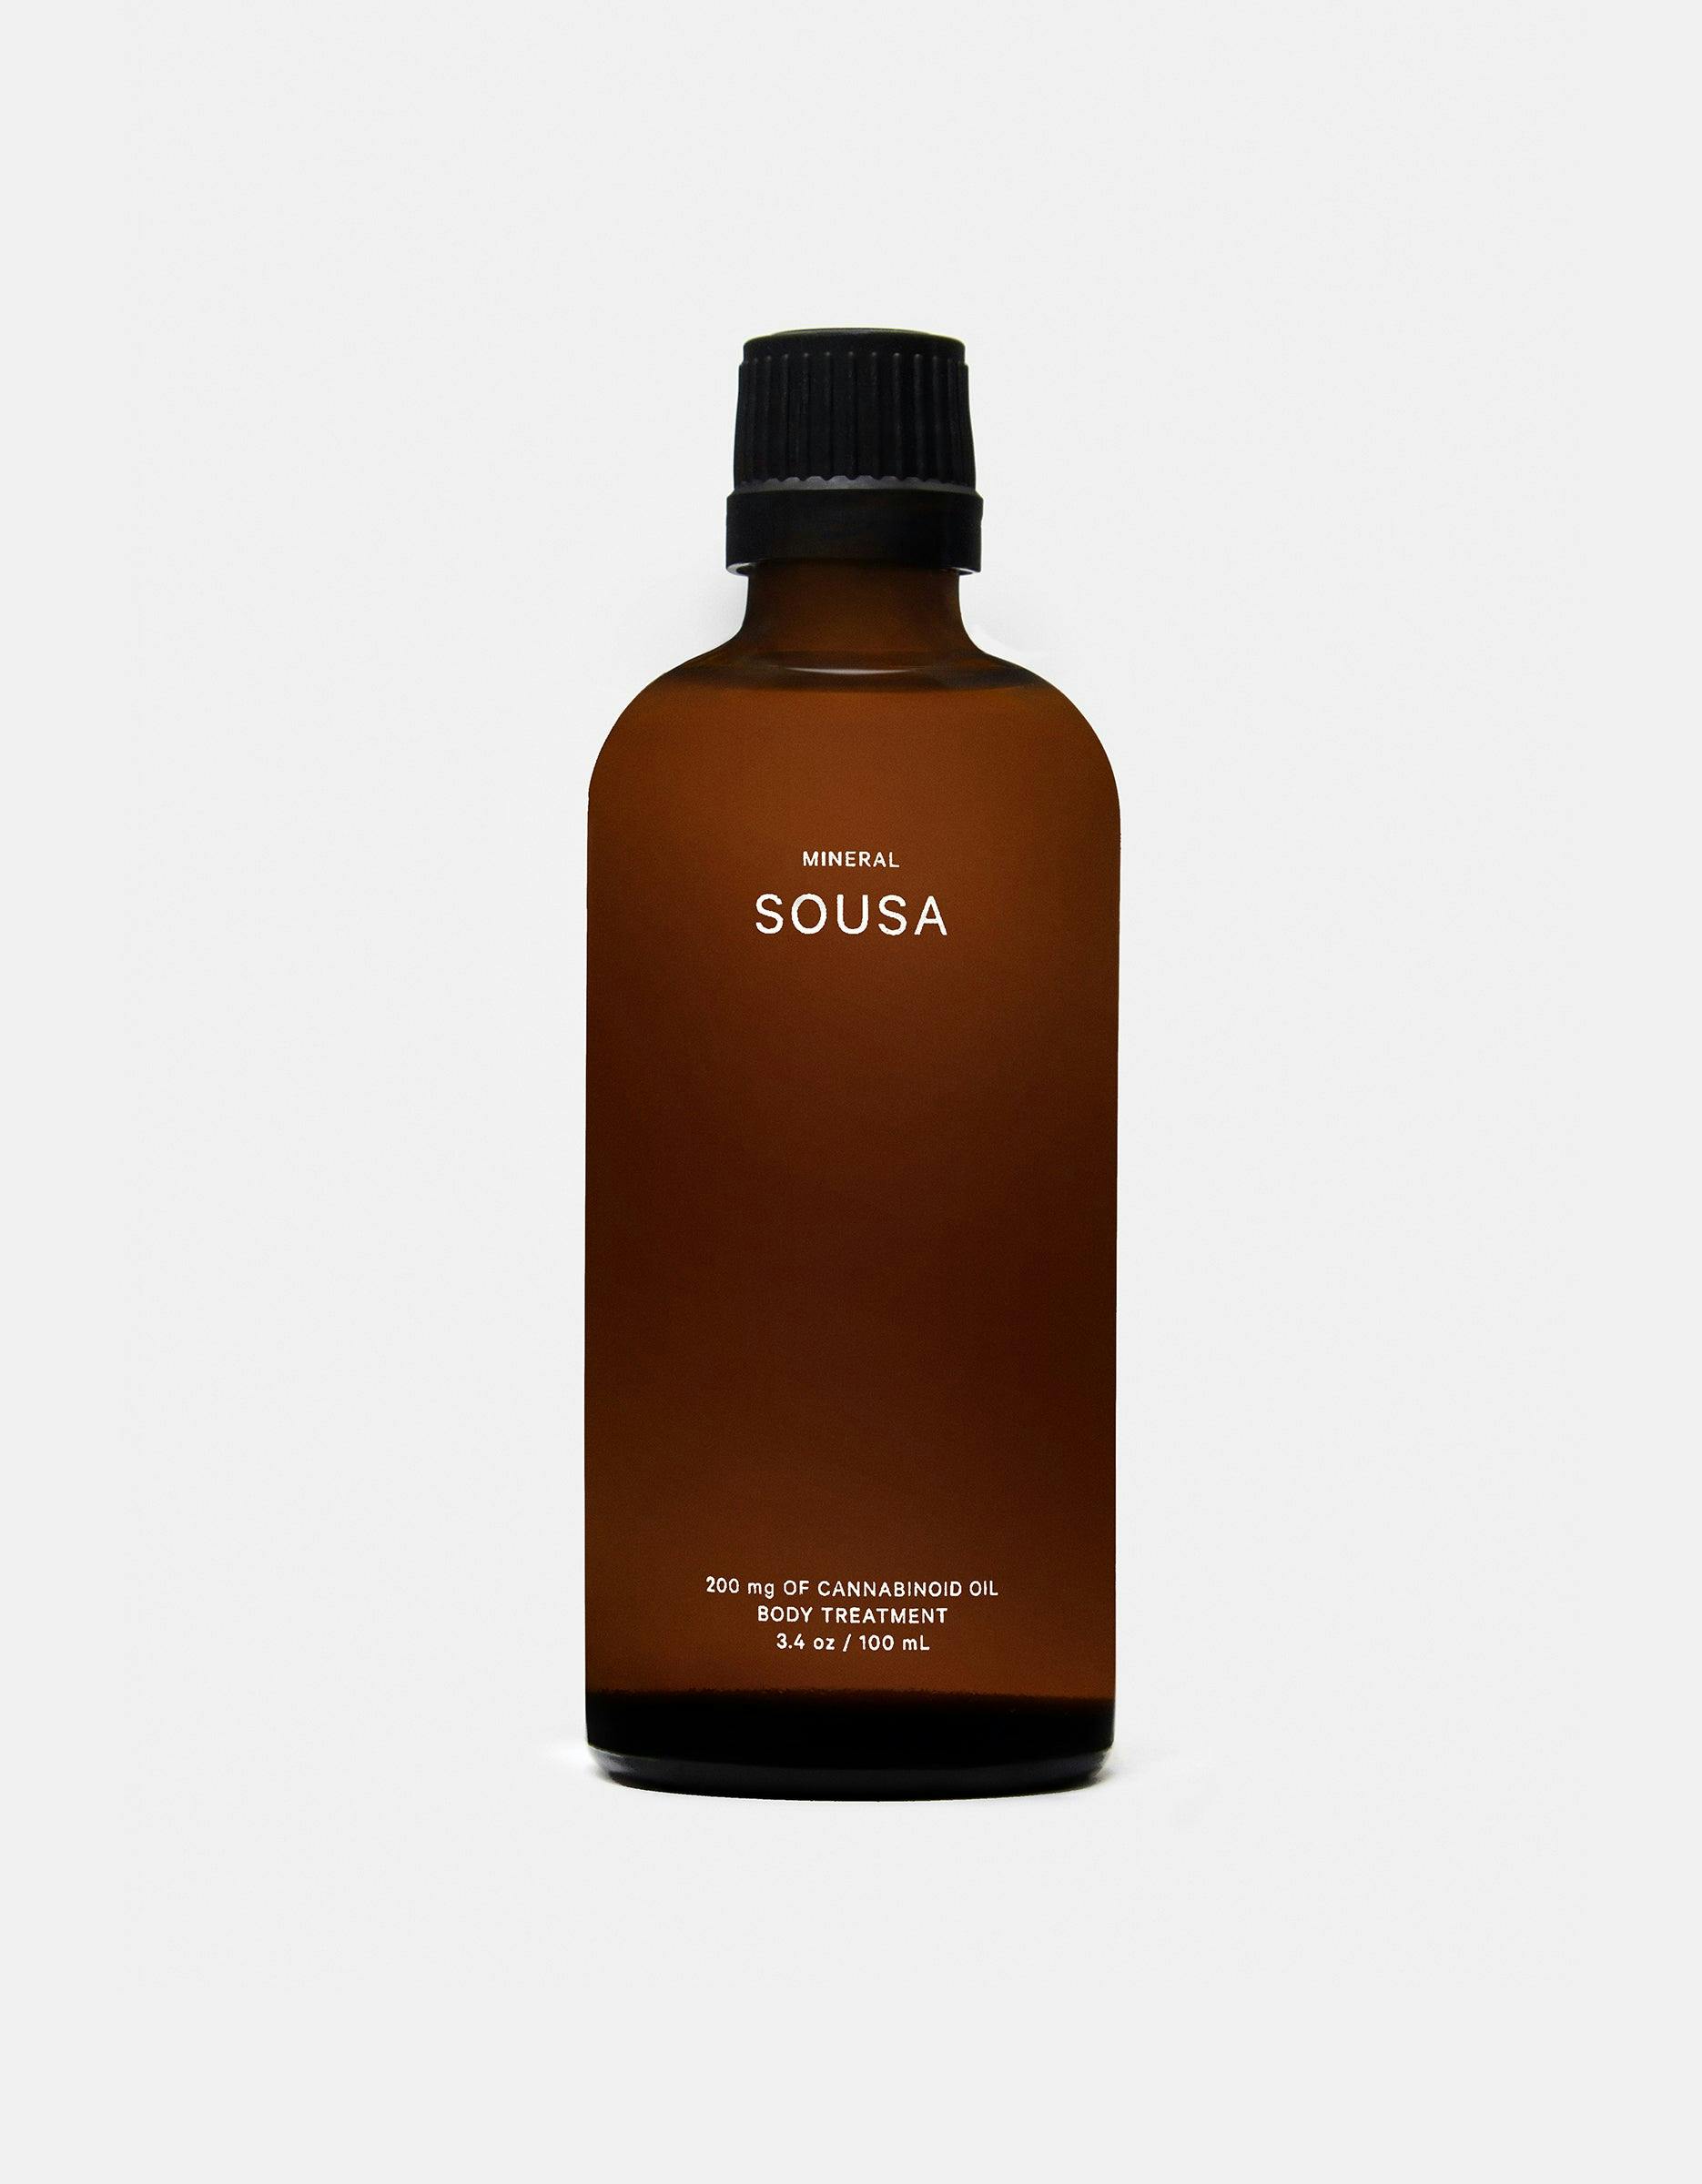 MINERAL SOUSA product